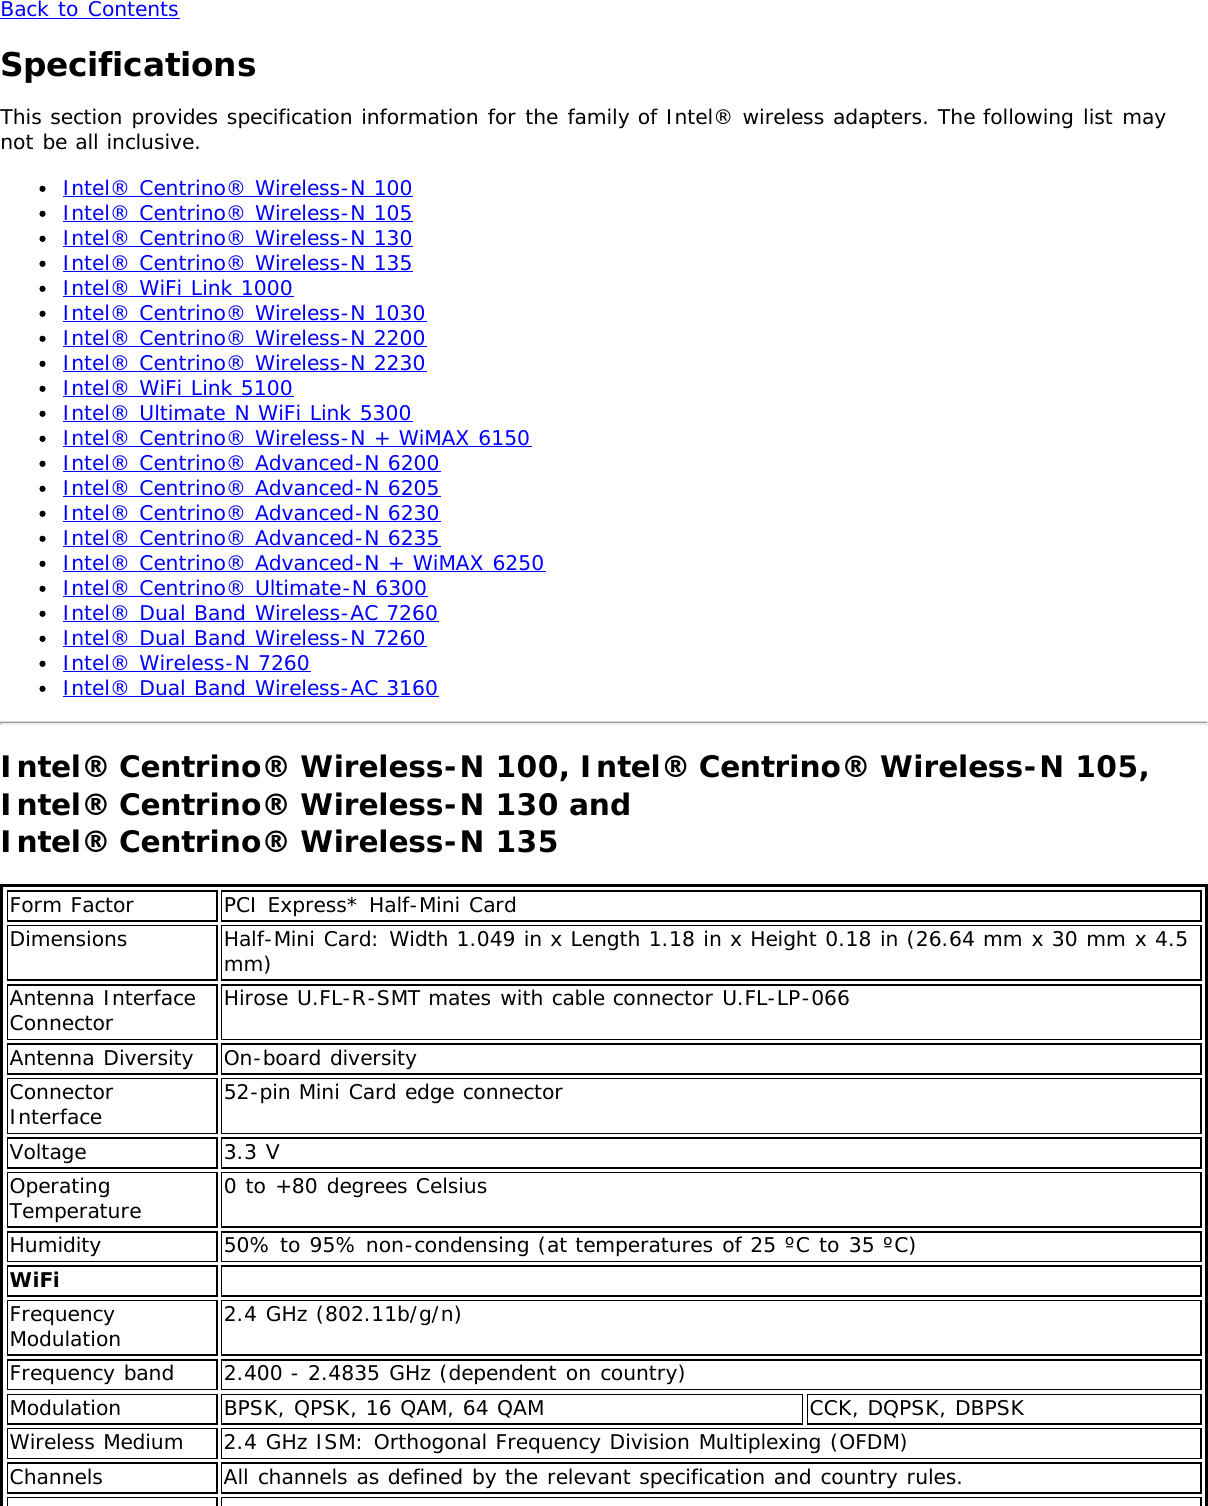 Back to ContentsSpecificationsThis section provides specification information for the family of Intel® wireless adapters. The following list maynot be all inclusive.Intel® Centrino® Wireless-N 100Intel® Centrino® Wireless-N 105Intel® Centrino® Wireless-N 130Intel® Centrino® Wireless-N 135Intel® WiFi Link 1000Intel® Centrino® Wireless-N 1030Intel® Centrino® Wireless-N 2200Intel® Centrino® Wireless-N 2230Intel® WiFi Link 5100Intel® Ultimate N WiFi Link 5300Intel® Centrino® Wireless-N + WiMAX 6150Intel® Centrino® Advanced-N 6200Intel® Centrino® Advanced-N 6205Intel® Centrino® Advanced-N 6230Intel® Centrino® Advanced-N 6235Intel® Centrino® Advanced-N + WiMAX 6250Intel® Centrino® Ultimate-N 6300Intel® Dual Band Wireless-AC 7260Intel® Dual Band Wireless-N 7260Intel® Wireless-N 7260Intel® Dual Band Wireless-AC 3160Intel® Centrino® Wireless-N 100, Intel® Centrino® Wireless-N 105,Intel® Centrino® Wireless-N 130 and Intel® Centrino® Wireless-N 135Form Factor PCI Express* Half-Mini CardDimensions Half-Mini Card: Width 1.049 in x Length 1.18 in x Height 0.18 in (26.64 mm x 30 mm x 4.5mm)Antenna InterfaceConnector Hirose U.FL-R-SMT mates with cable connector U.FL-LP-066Antenna Diversity On-board diversityConnectorInterface 52-pin Mini Card edge connectorVoltage 3.3 VOperatingTemperature 0 to +80 degrees CelsiusHumidity 50% to 95% non-condensing (at temperatures of 25 ºC to 35 ºC)WiFi  FrequencyModulation 2.4 GHz (802.11b/g/n)Frequency band 2.400 - 2.4835 GHz (dependent on country)Modulation BPSK, QPSK, 16 QAM, 64 QAM CCK, DQPSK, DBPSKWireless Medium 2.4 GHz ISM: Orthogonal Frequency Division Multiplexing (OFDM)Channels All channels as defined by the relevant specification and country rules.